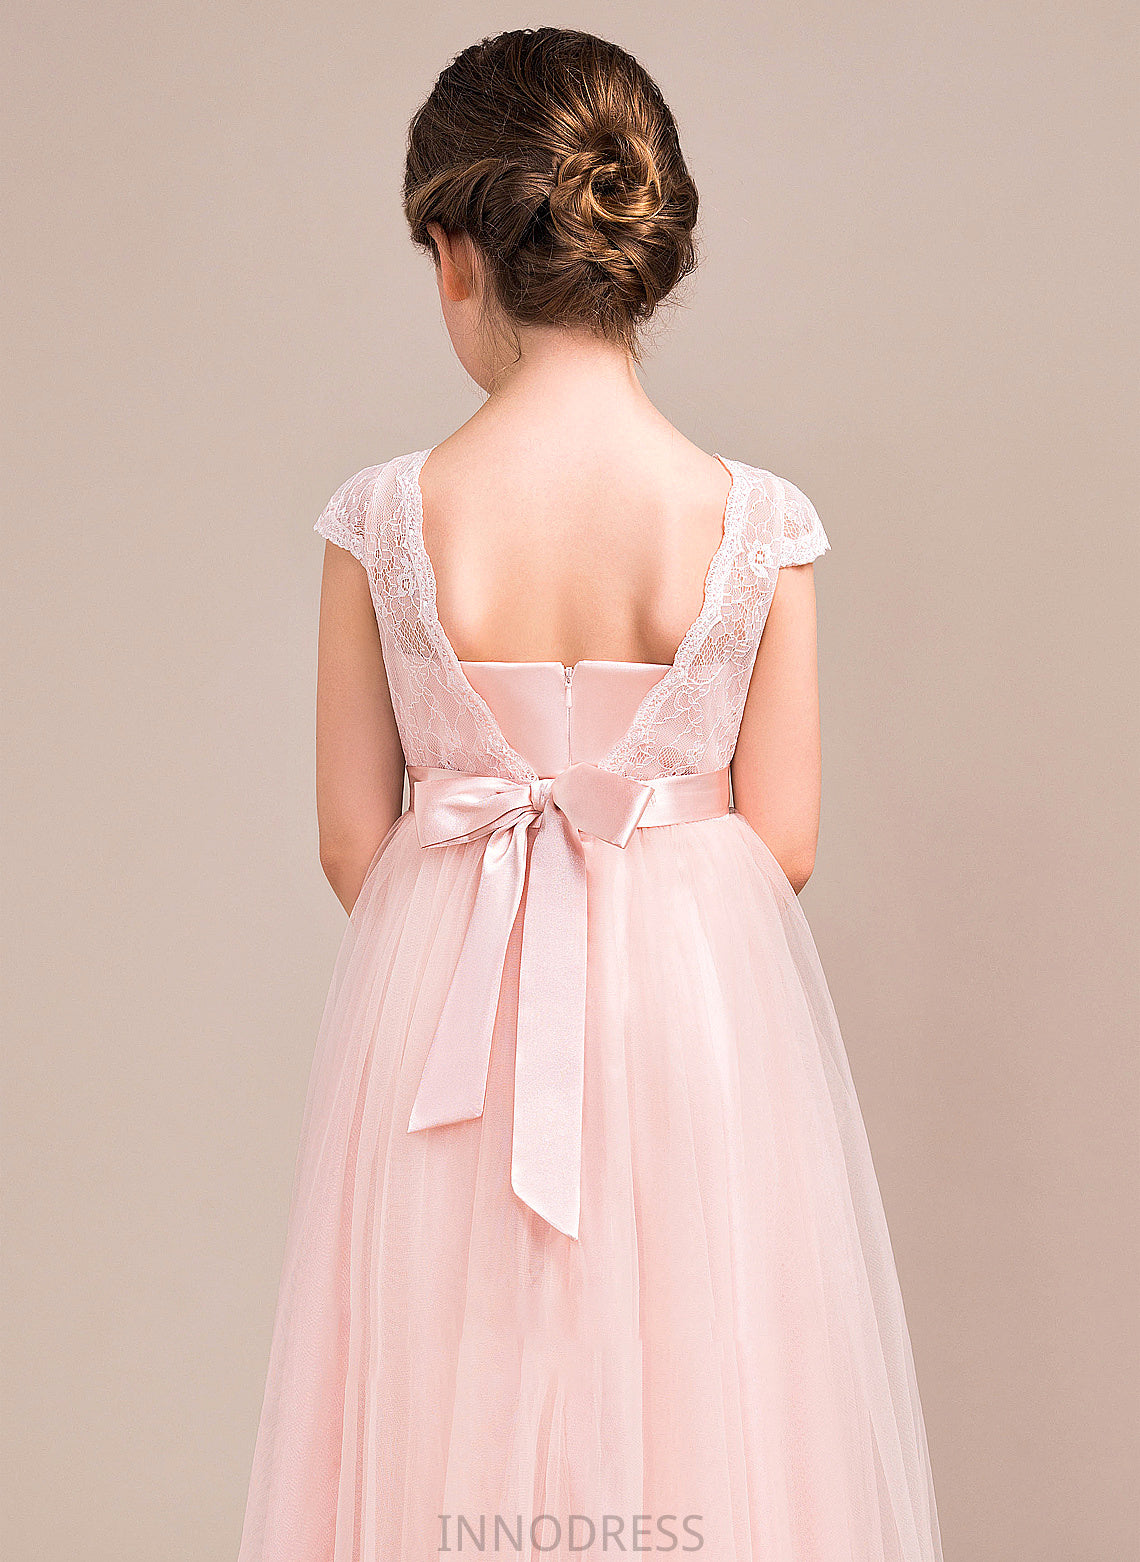 Junior Bridesmaid Dresses Scoop Tulle Bow(s) With Neck Floor-Length Brianna A-Line Lace